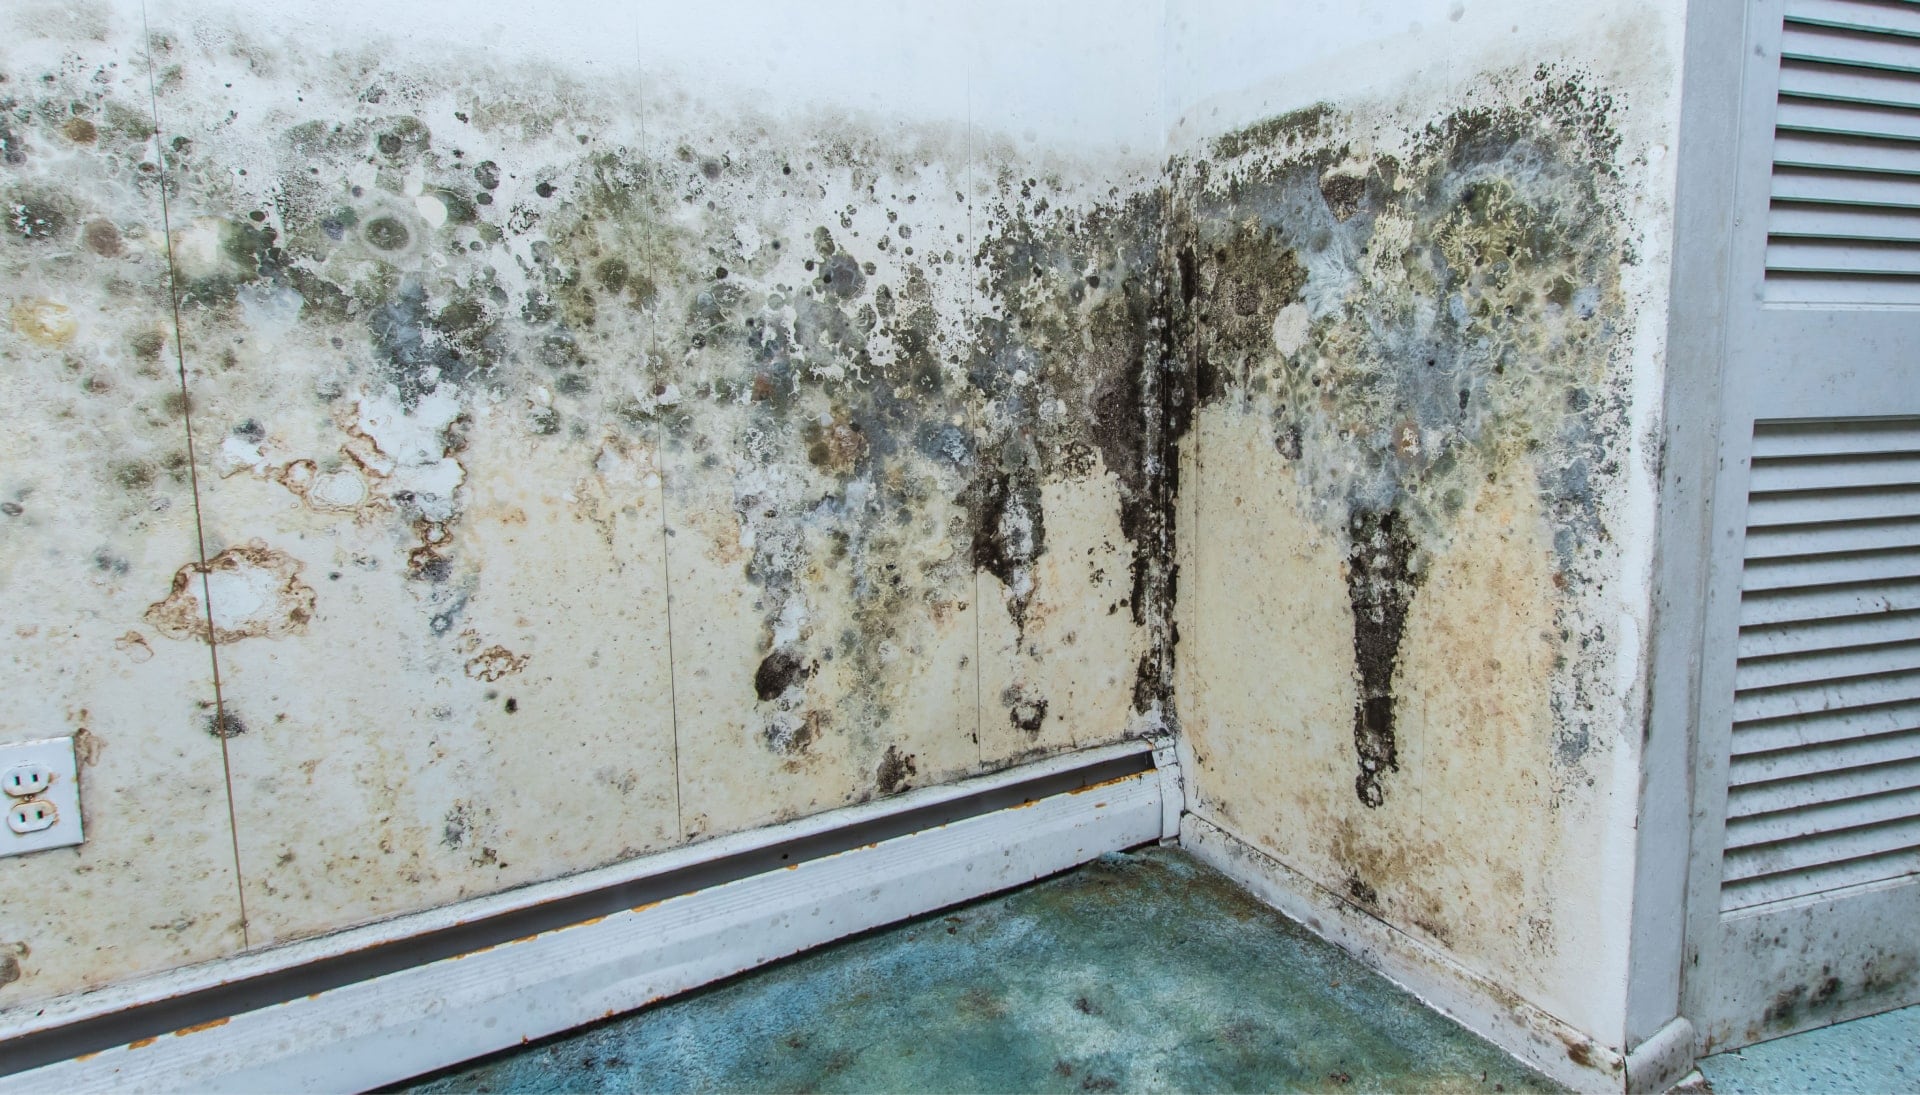 Professional mold removal, odor control, and water damage restoration service in Orem, Utah.